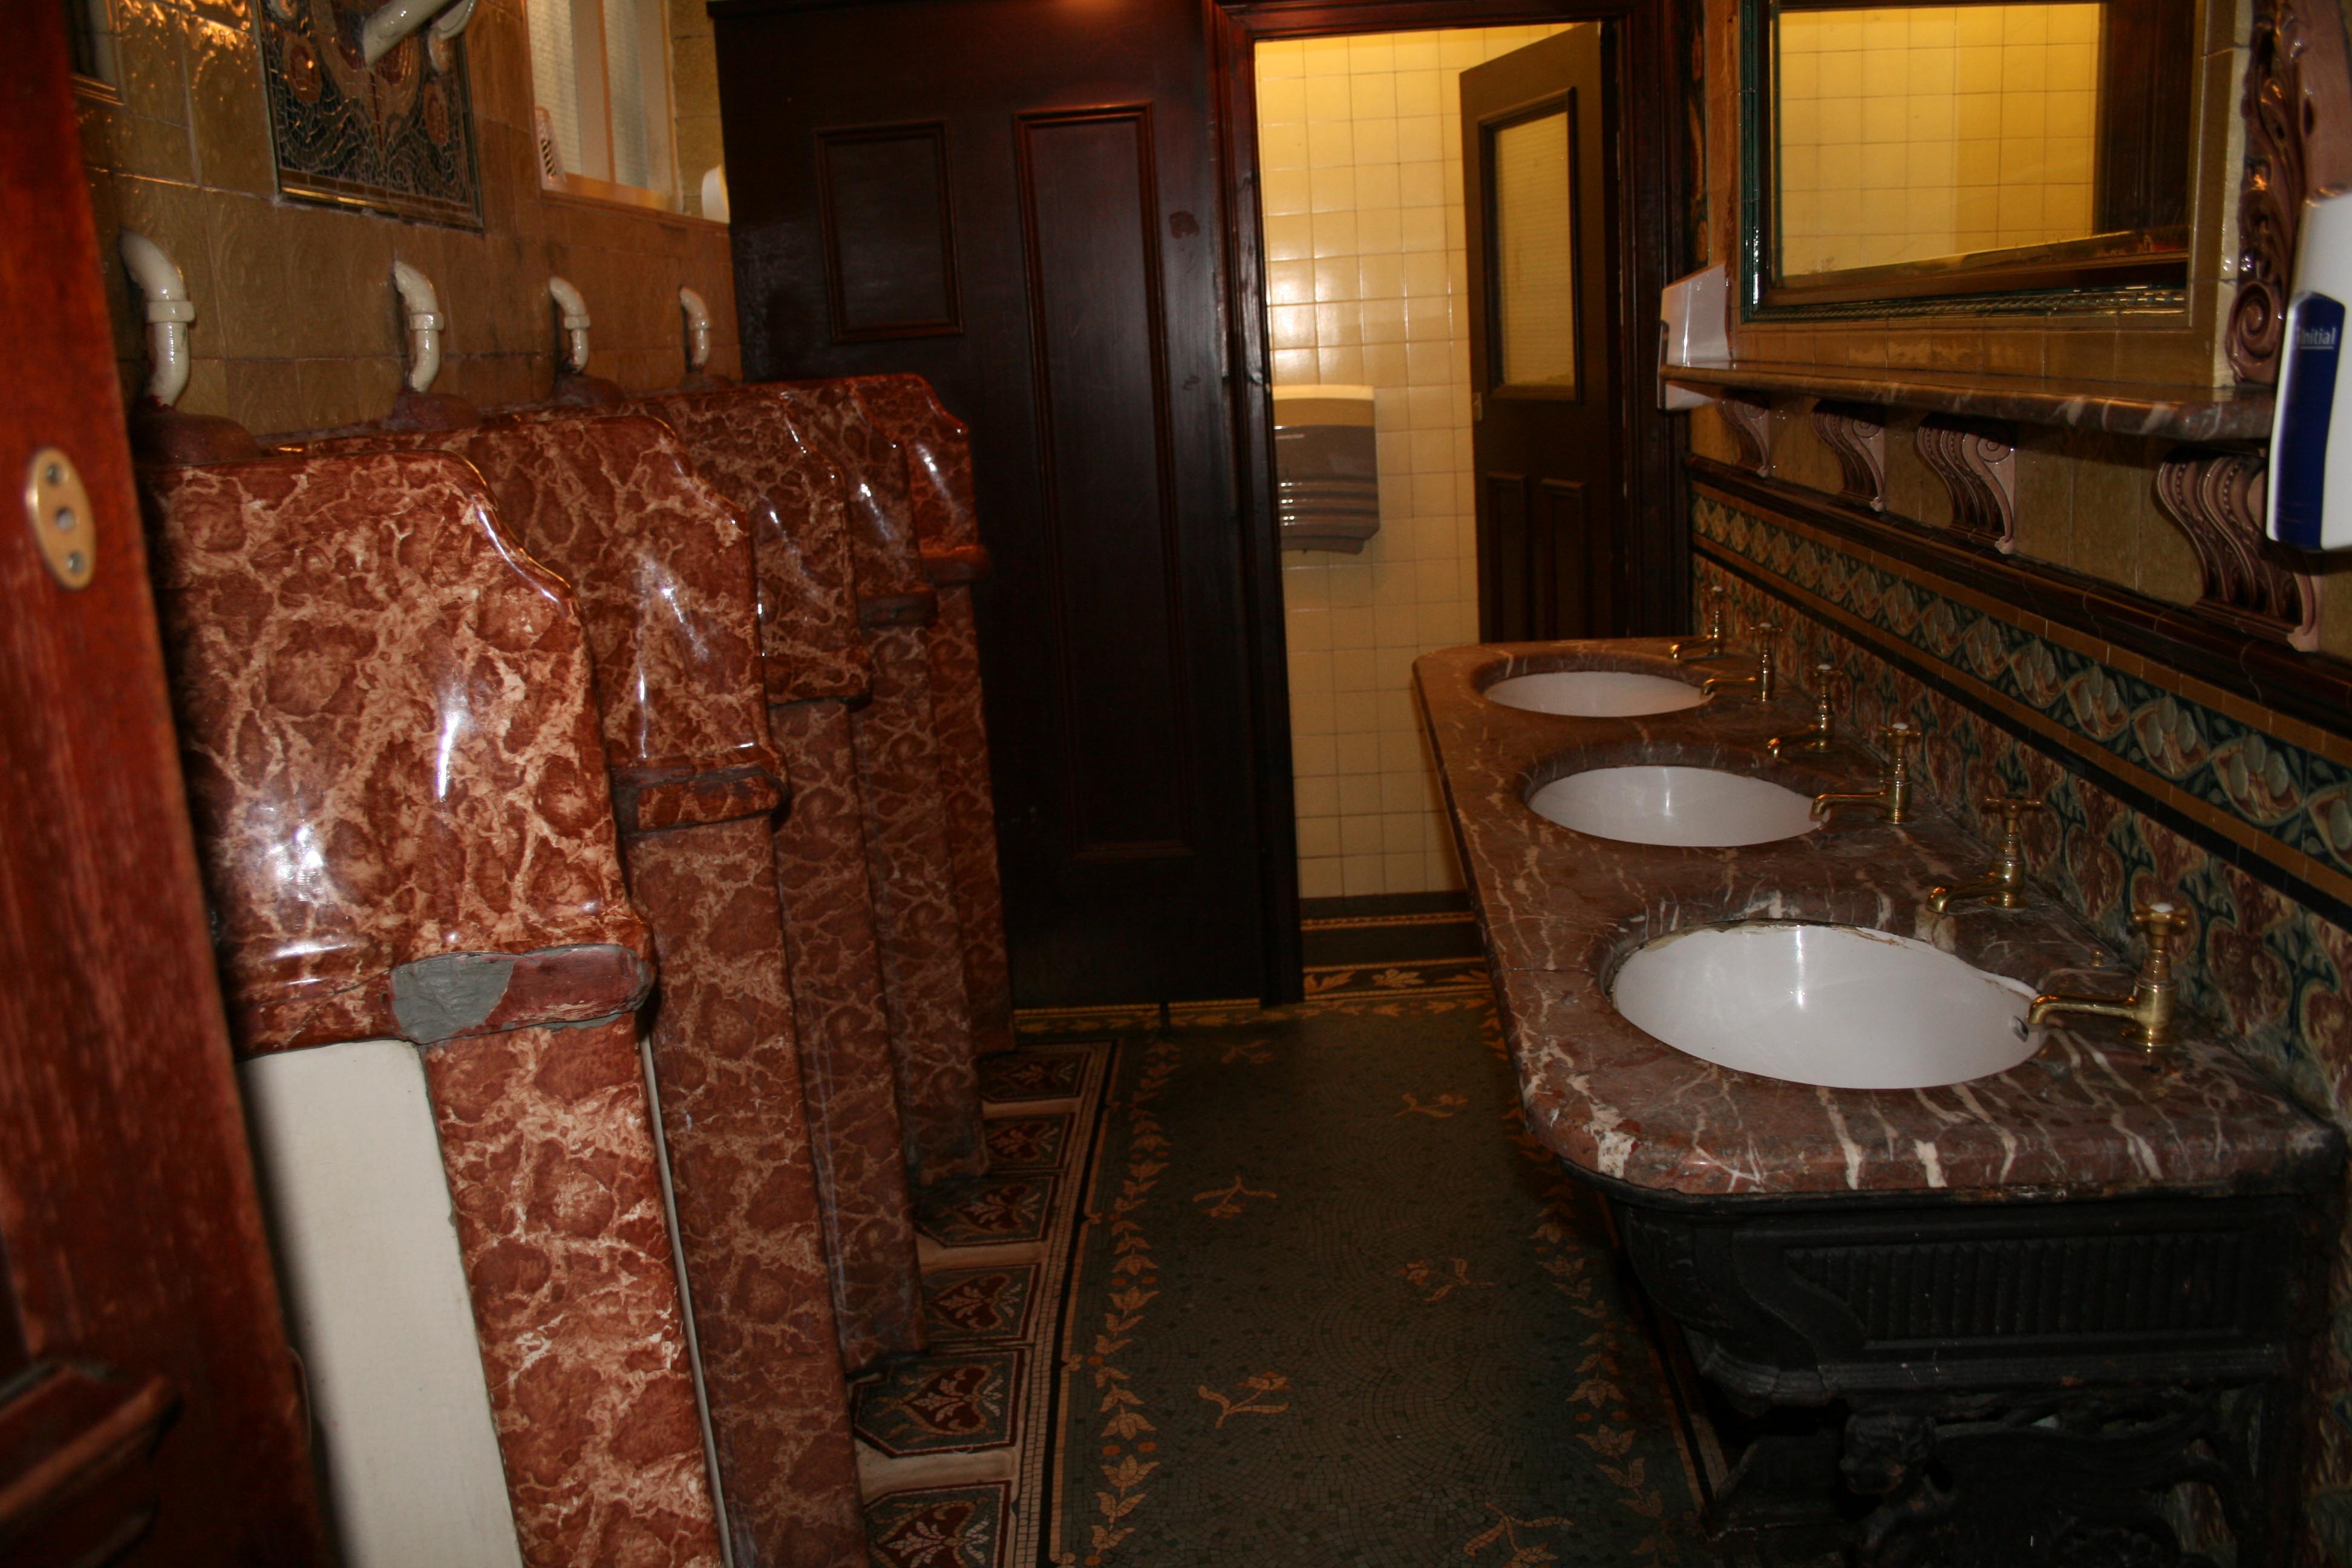 Men's lavvies at the Phil